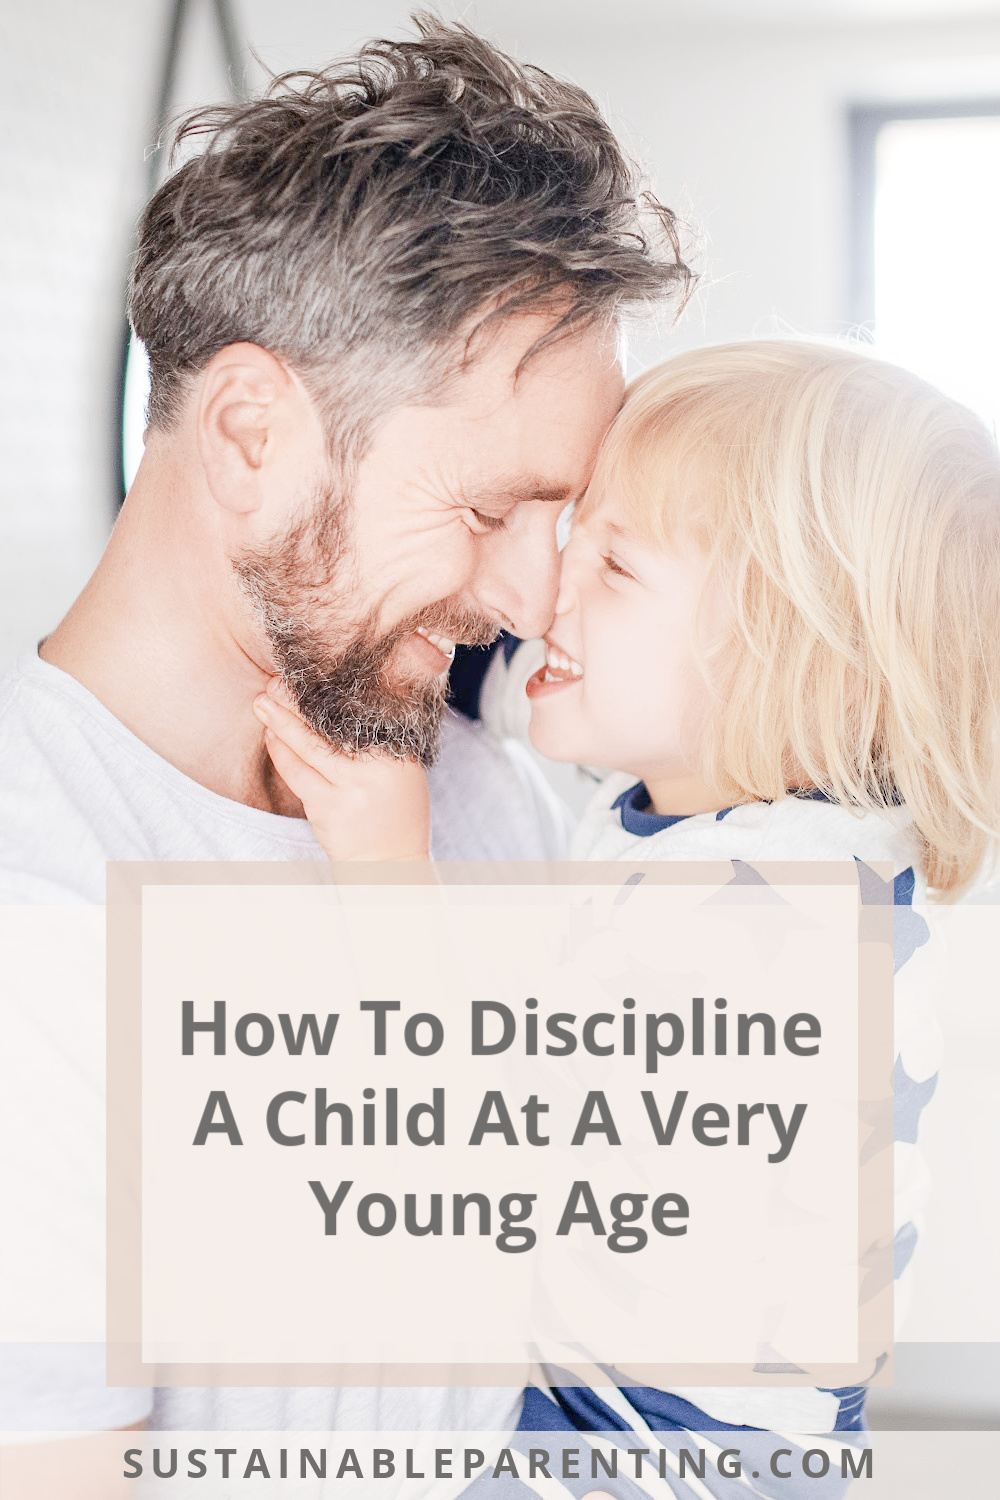 How To Discipline A Child At A Very Young Age